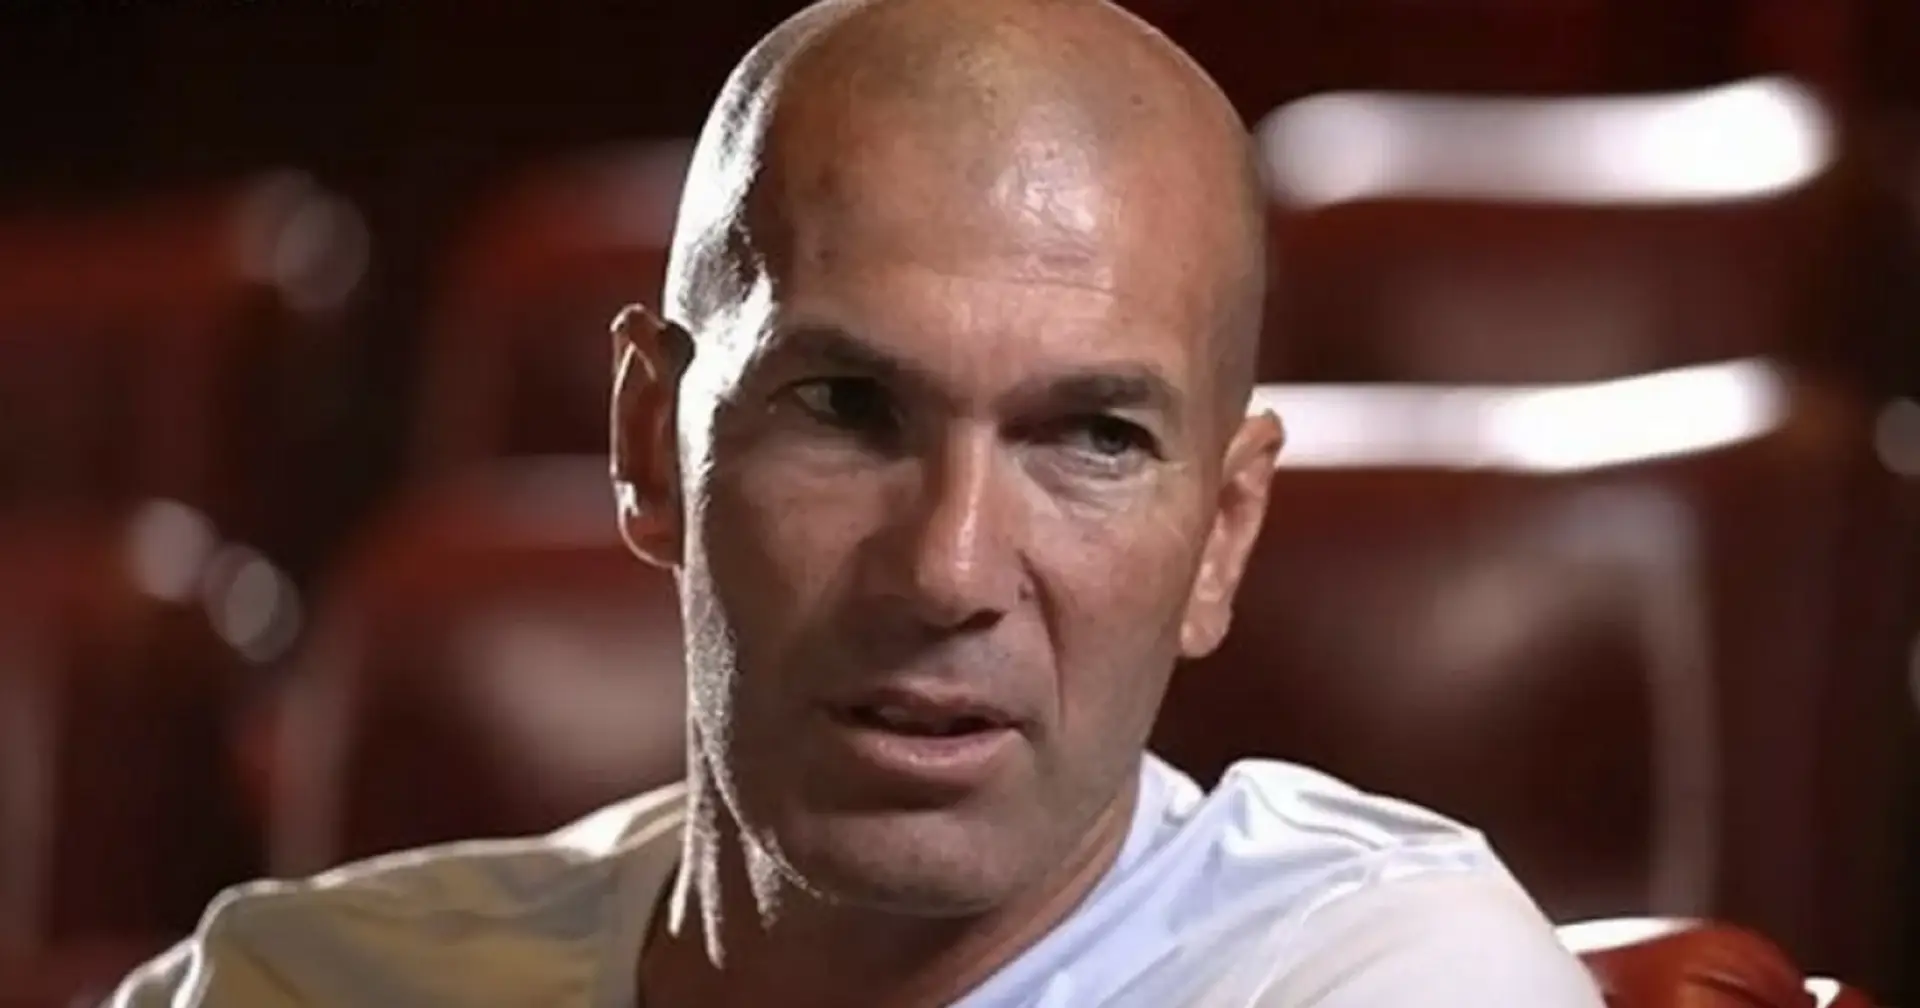 Zidane trending among Liverpool fans — here is why